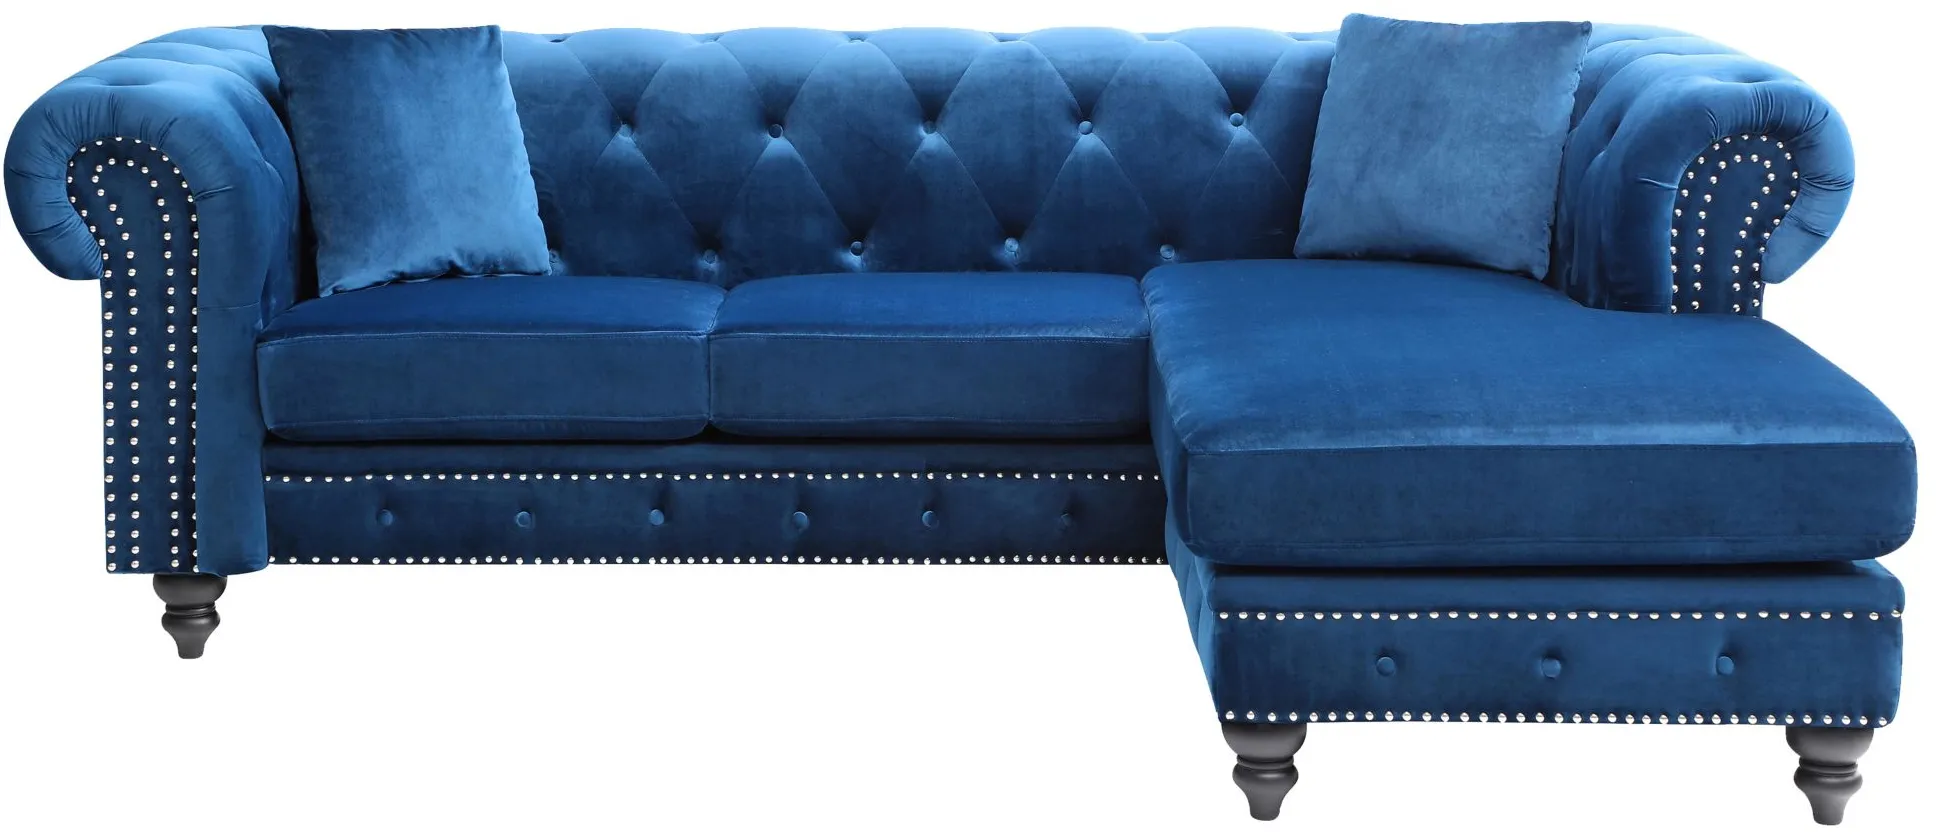 Nola 2-pc. Sectional Sofa in Navy Blue by Glory Furniture